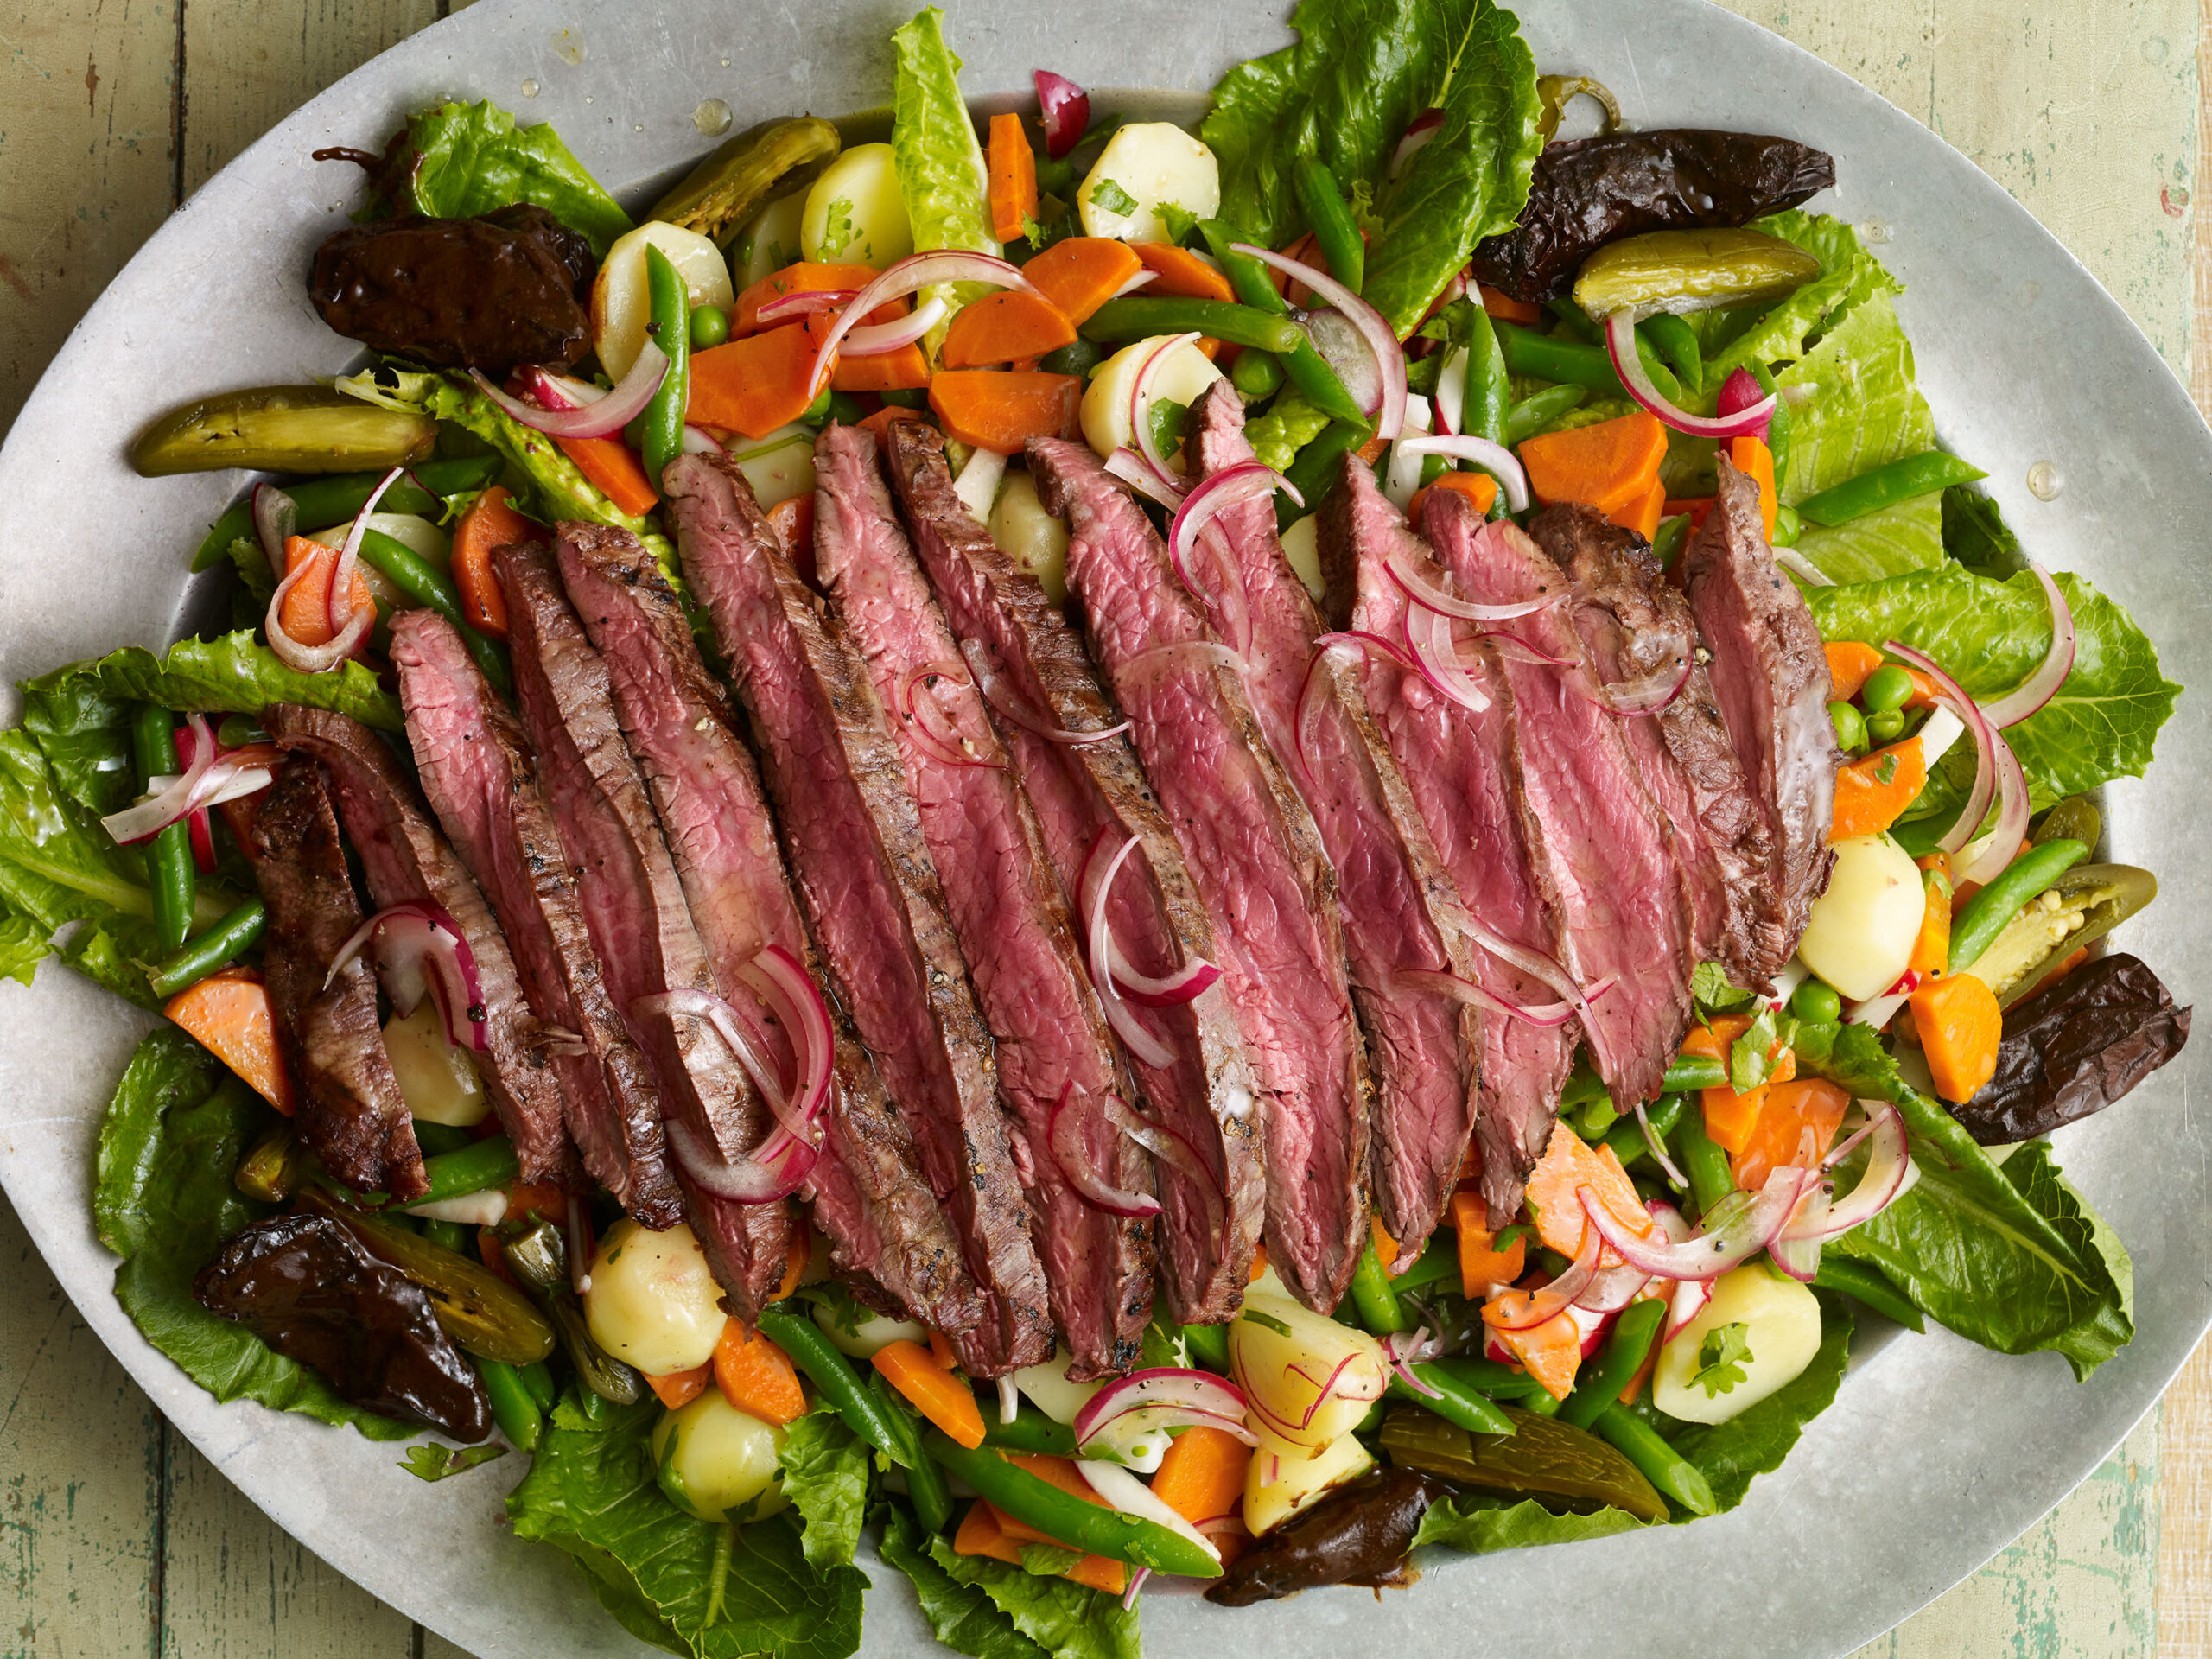 Salpicon or Mexican Grilled Steak Salad